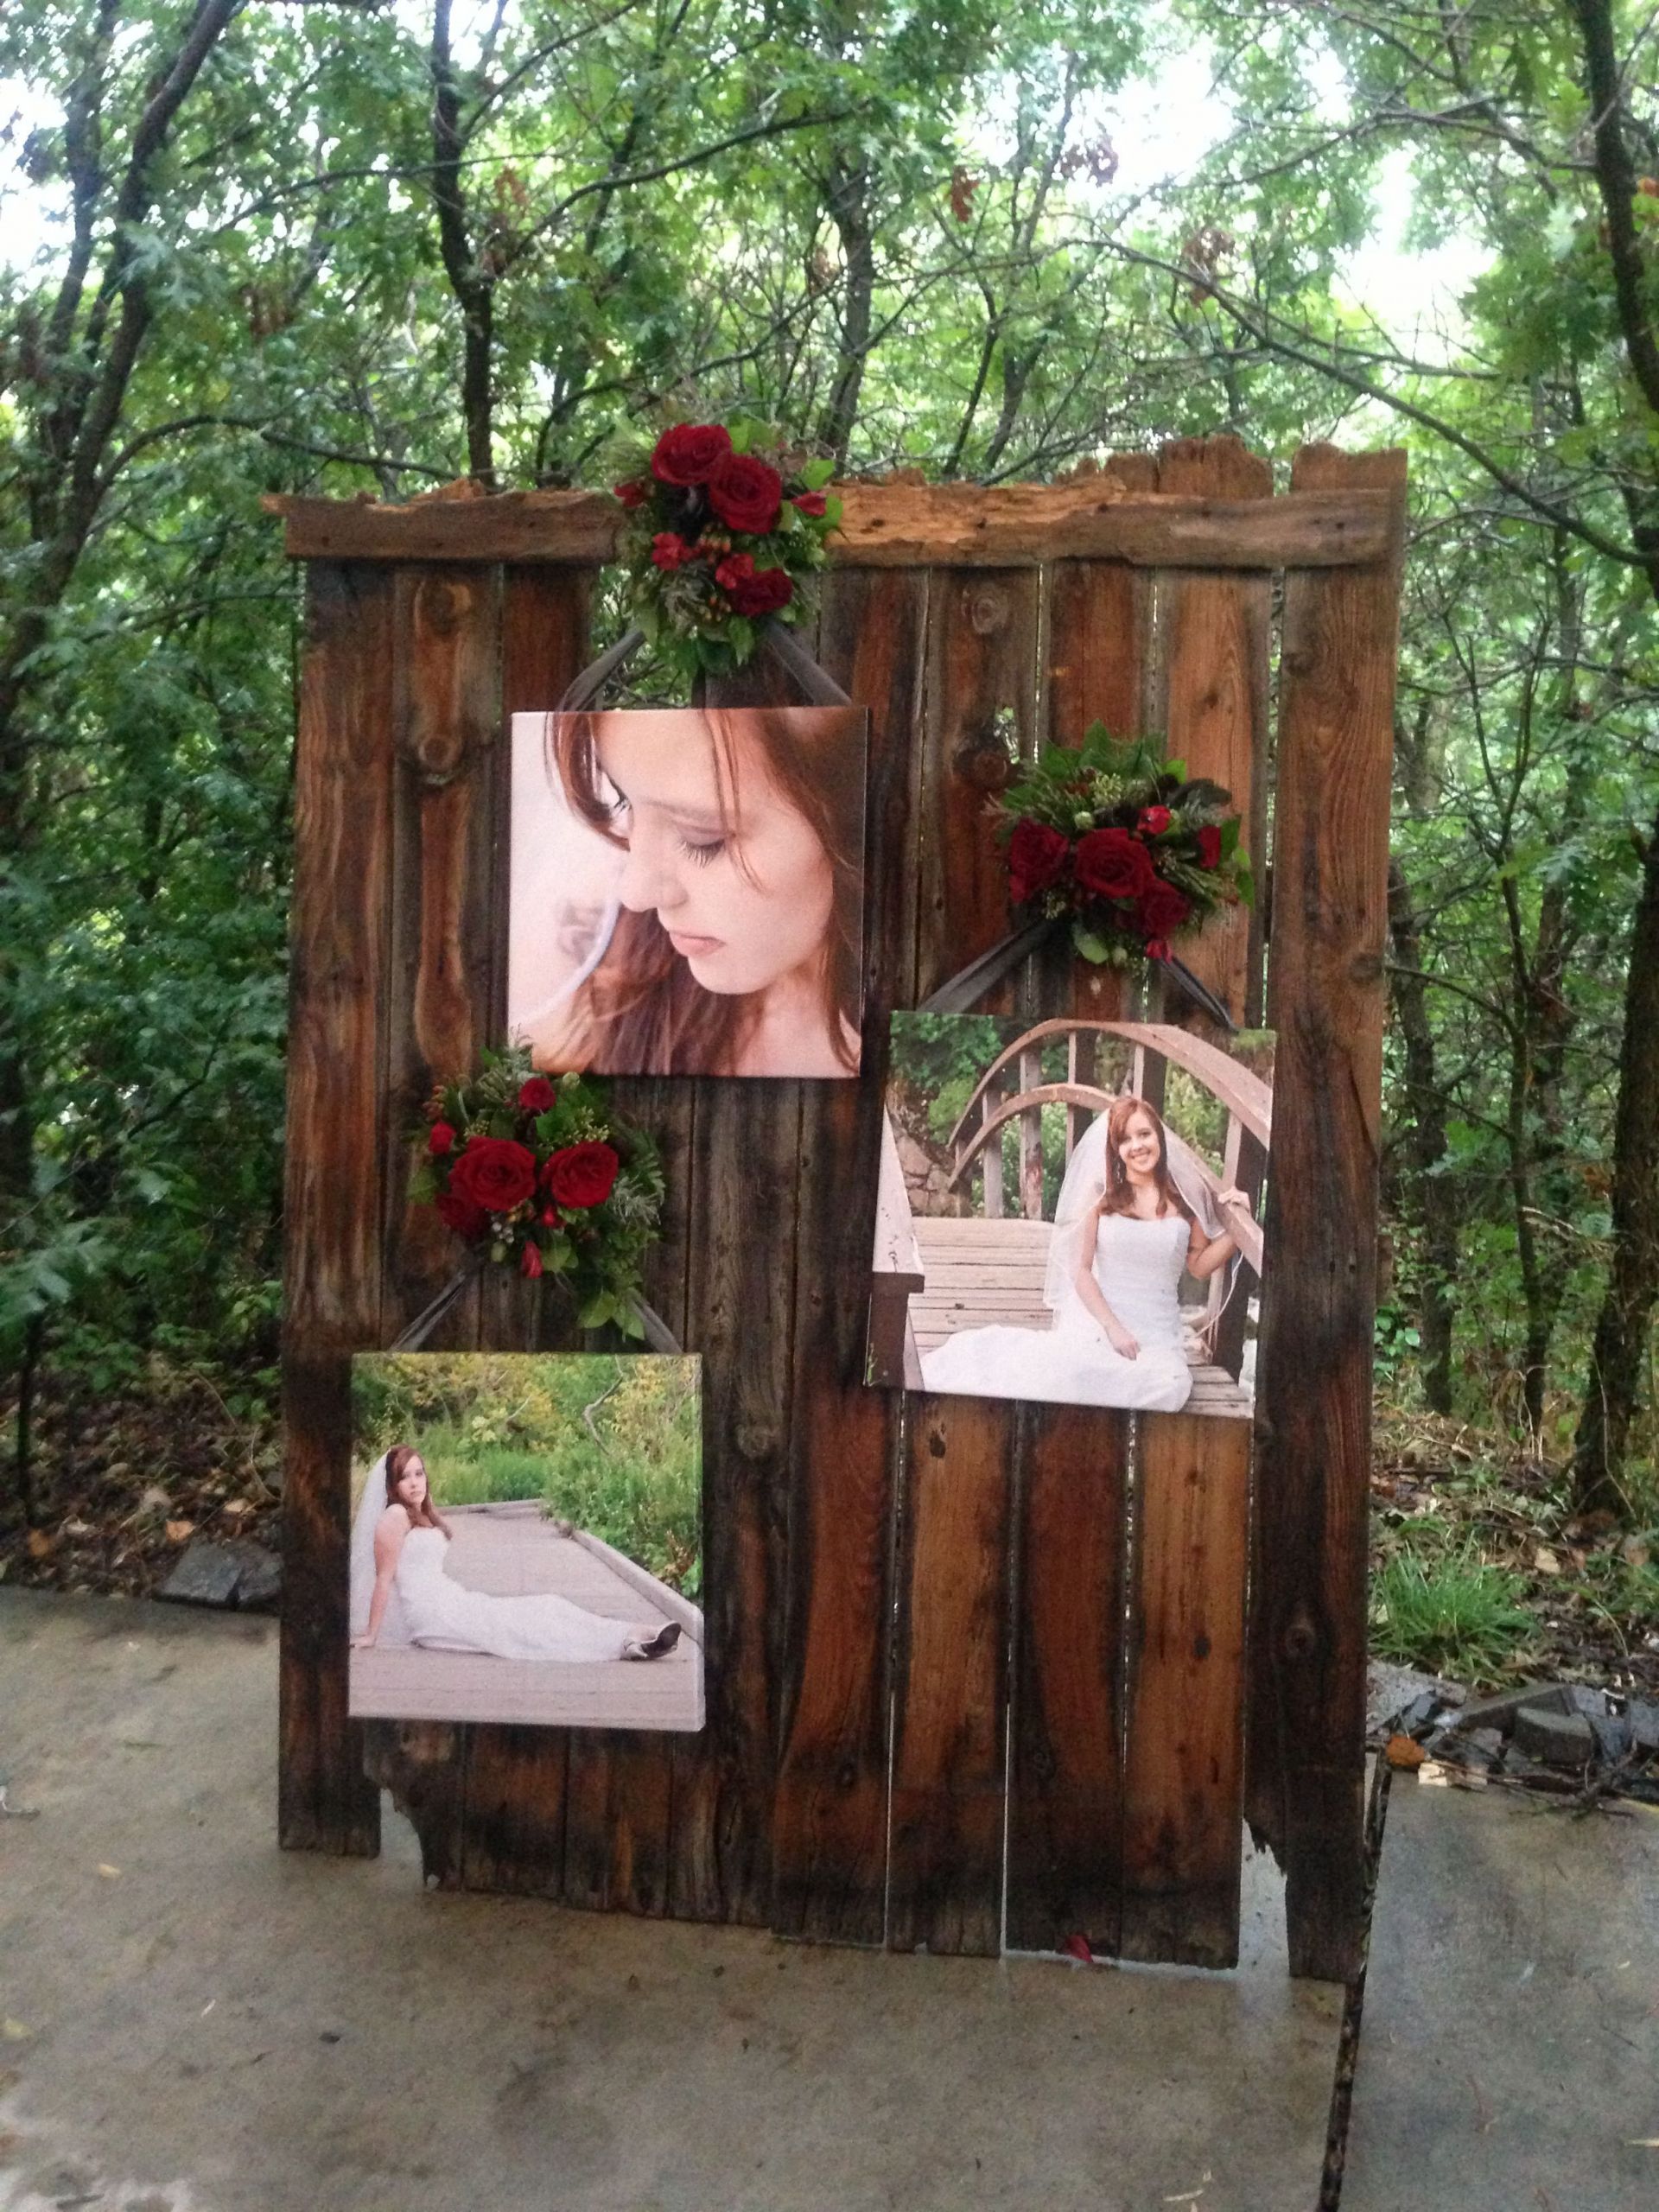 Used Rustic Wedding Decorations For Sale
 Great way to display wedding pictures old barn wood panel